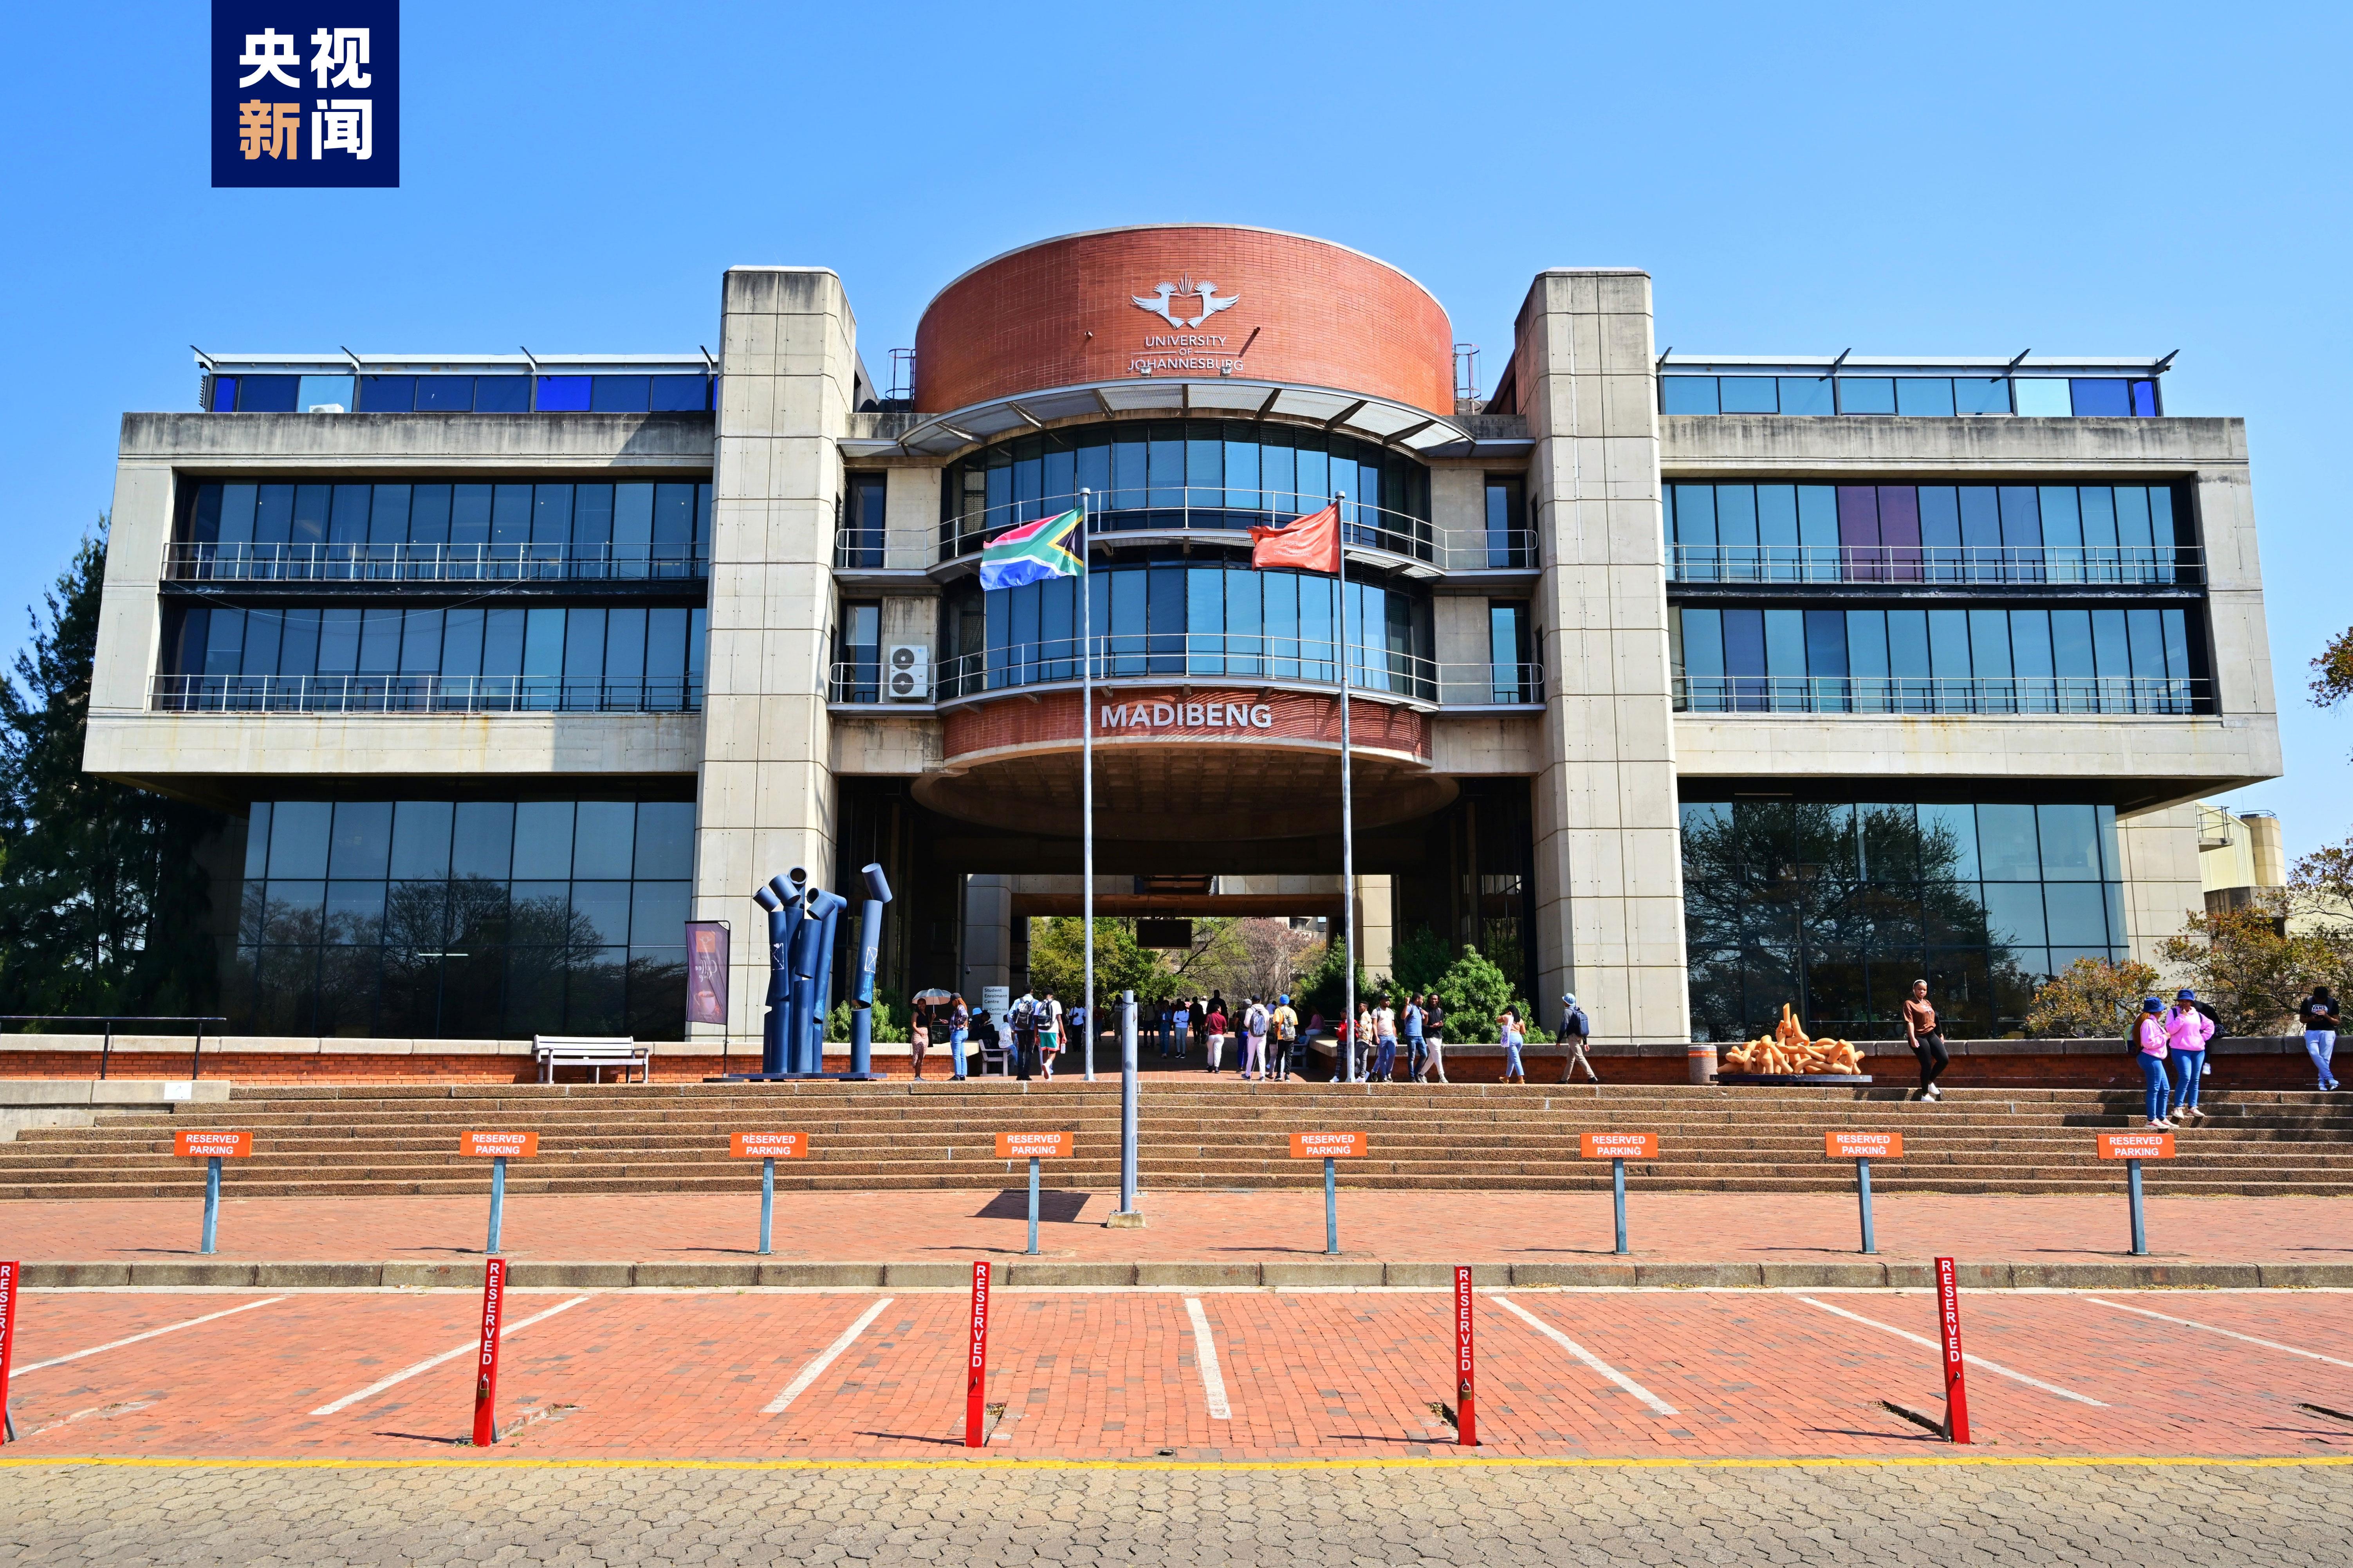 The University of Johannesburg is a public university located in Johannesburg, South Africa. /CMG